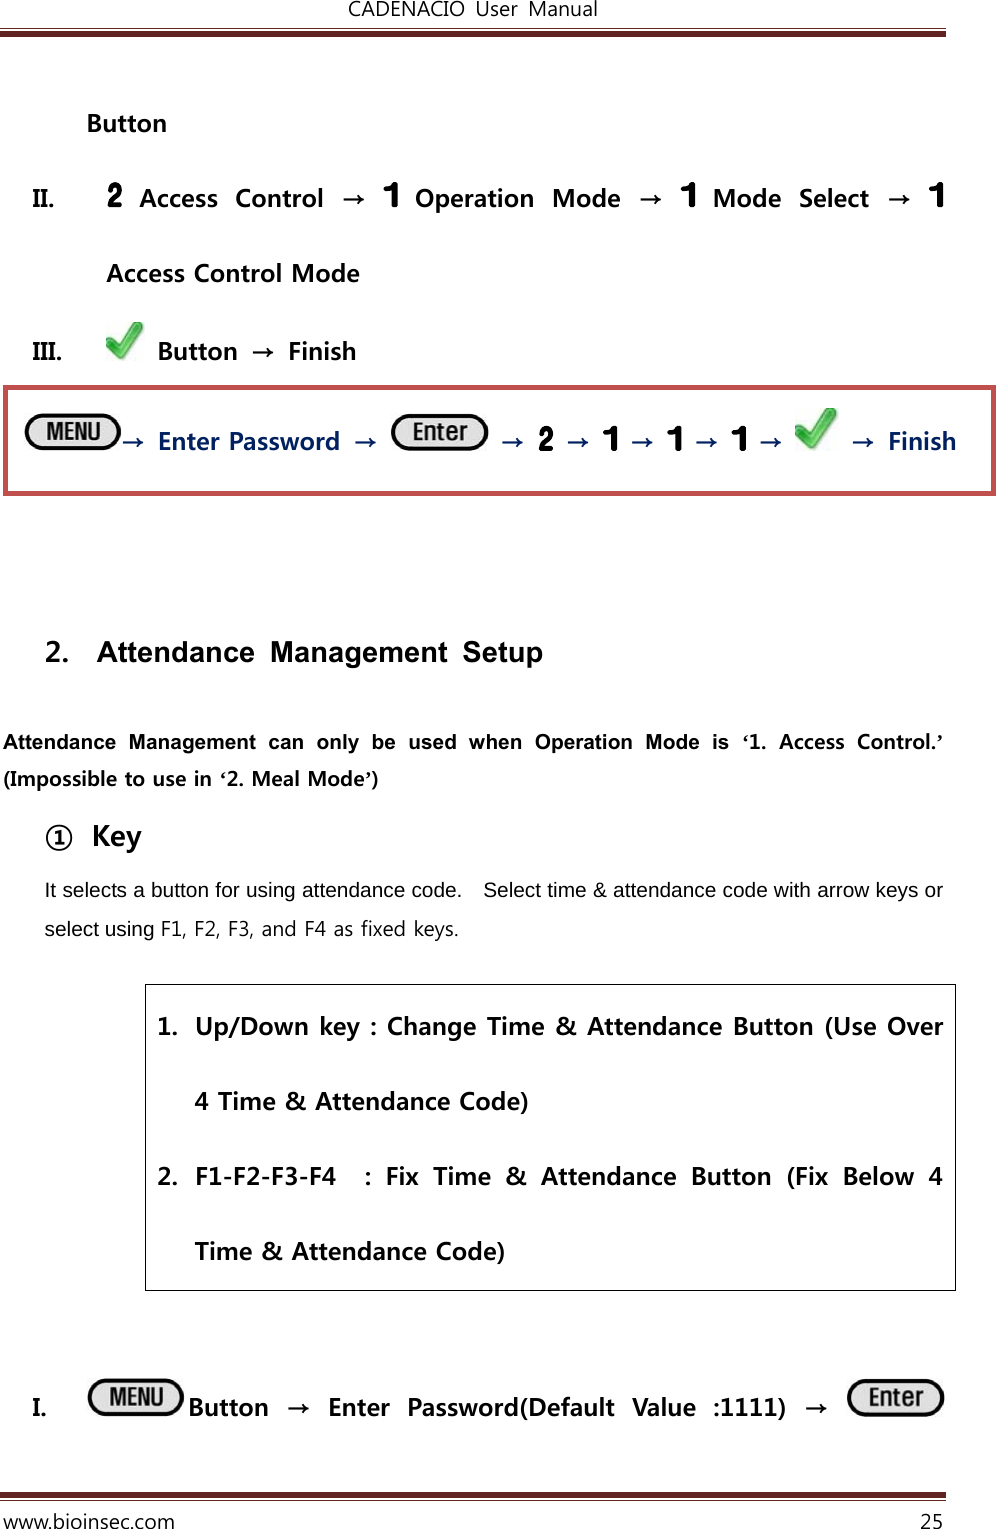 CADENACIO  User  Manual  www.bioinsec.com 25  Button II.   Access  Control  →    Operation  Mode  →   Mode  Select  →   Access Control Mode III.   Button  →  Finish     2.  Attendance Management Setup  Attendance Management can only be used when Operation Mode is ‘1. Access Control.’ (Impossible to use in ‘2. Meal Mode’) ① Key It selects a button for using attendance code.  Select time &amp; attendance code with arrow keys or select using F1, F2, F3, and F4 as fixed keys.  1. Up/Down key : Change Time &amp; Attendance Button (Use Over 4 Time &amp; Attendance Code) 2. F1-F2-F3-F4    :  Fix  Time  &amp;  Attendance  Button  (Fix  Below  4 Time &amp; Attendance Code)   I. Button  →  Enter  Password(Default  Value  :1111)  →   →  Enter Password  →   →   →   →   →   →    →  Finish 